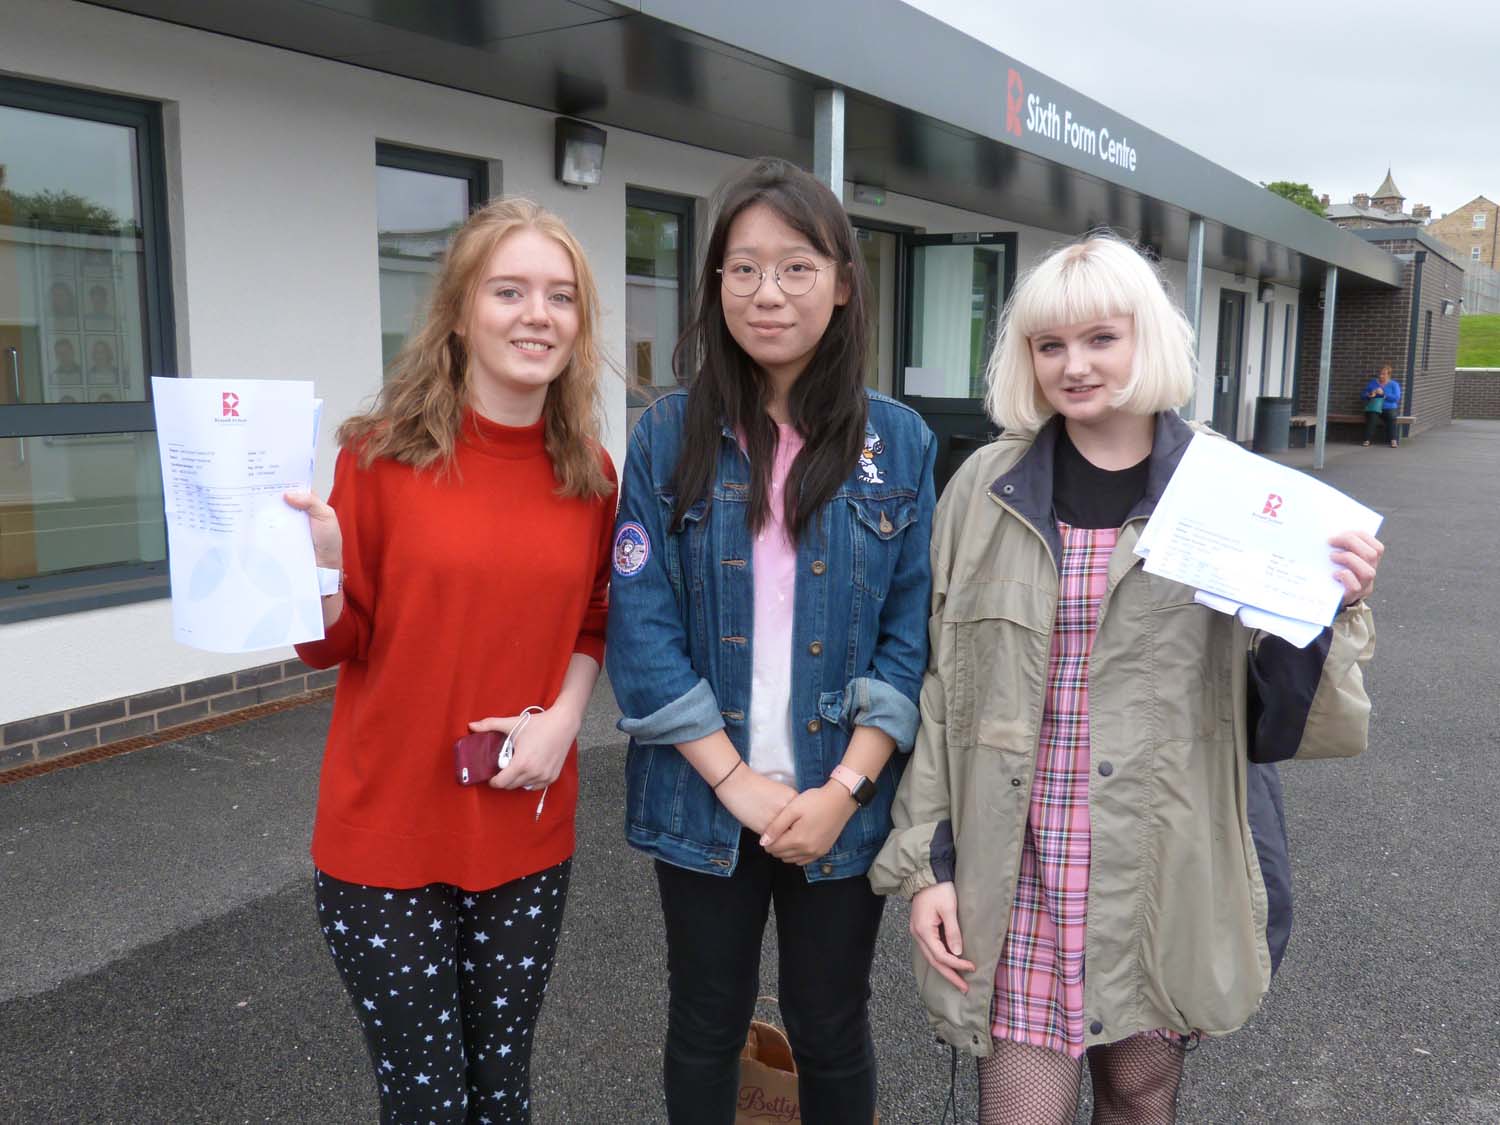 Laura Houseman (A*AAB), Joanne Ho (A*AB) and Hannah Dolman (A*AA) were among Rossett's high achievers and will be studying Fashion, Veterinary Medicine and Music Journalism respectively